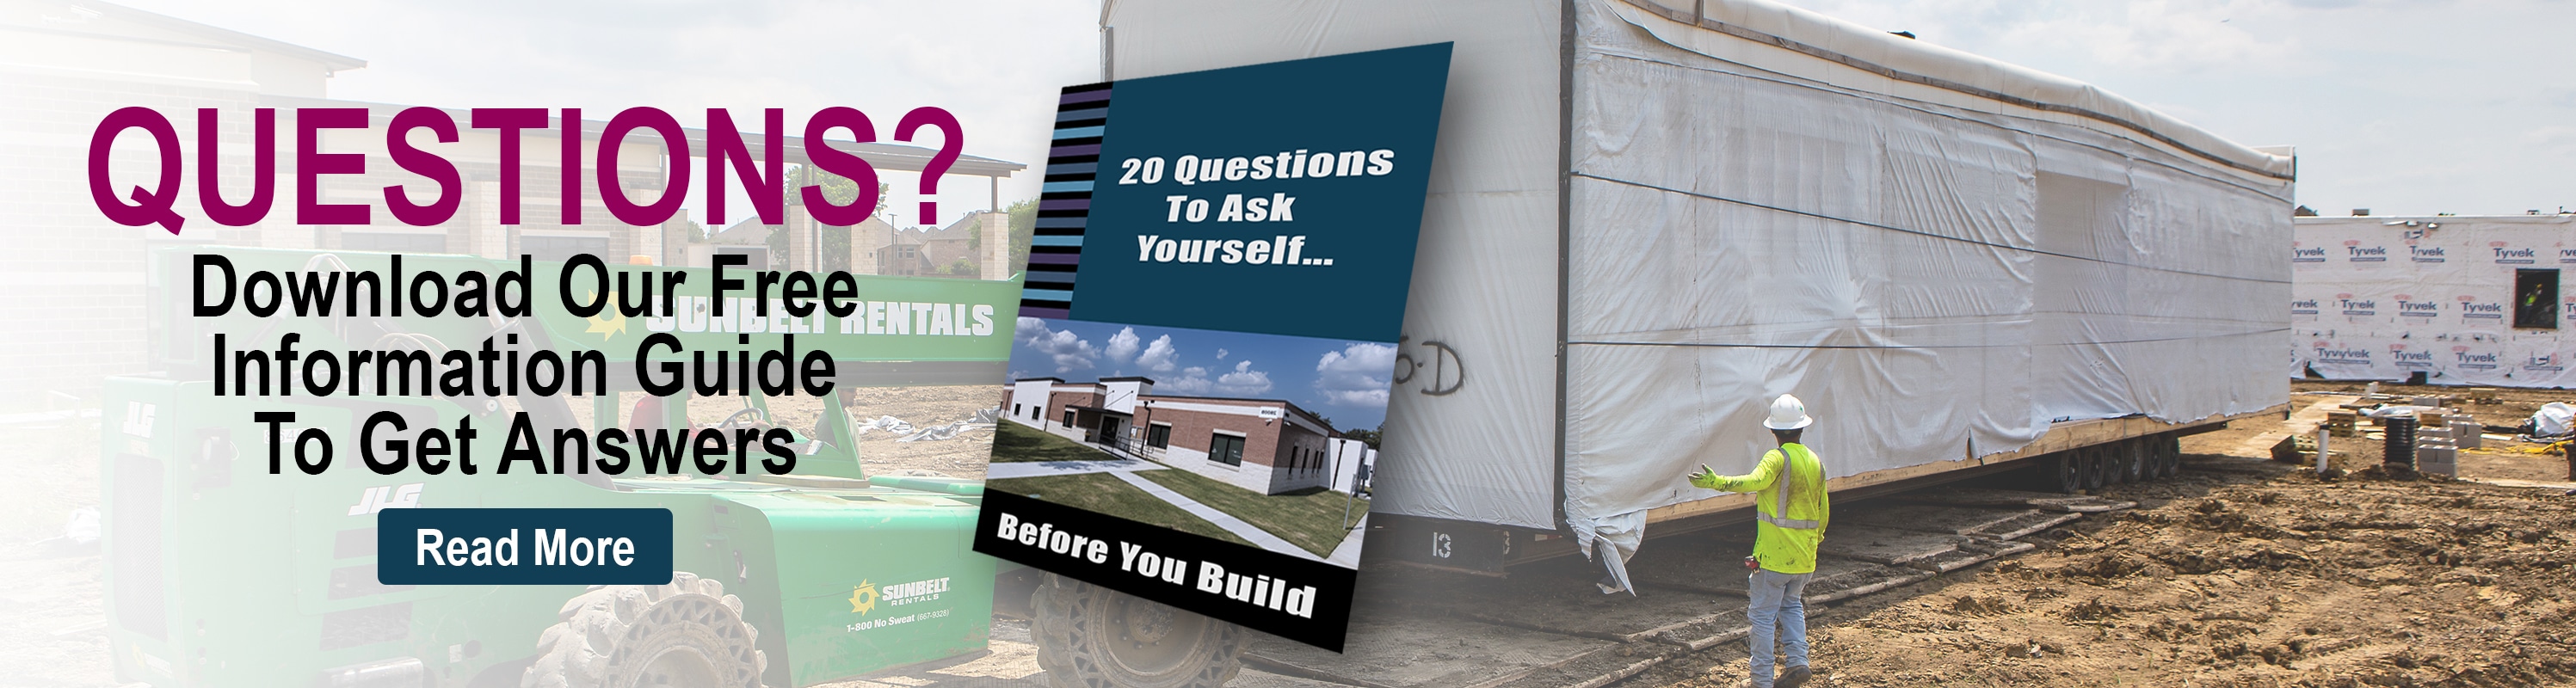 20 Questions Before You Build